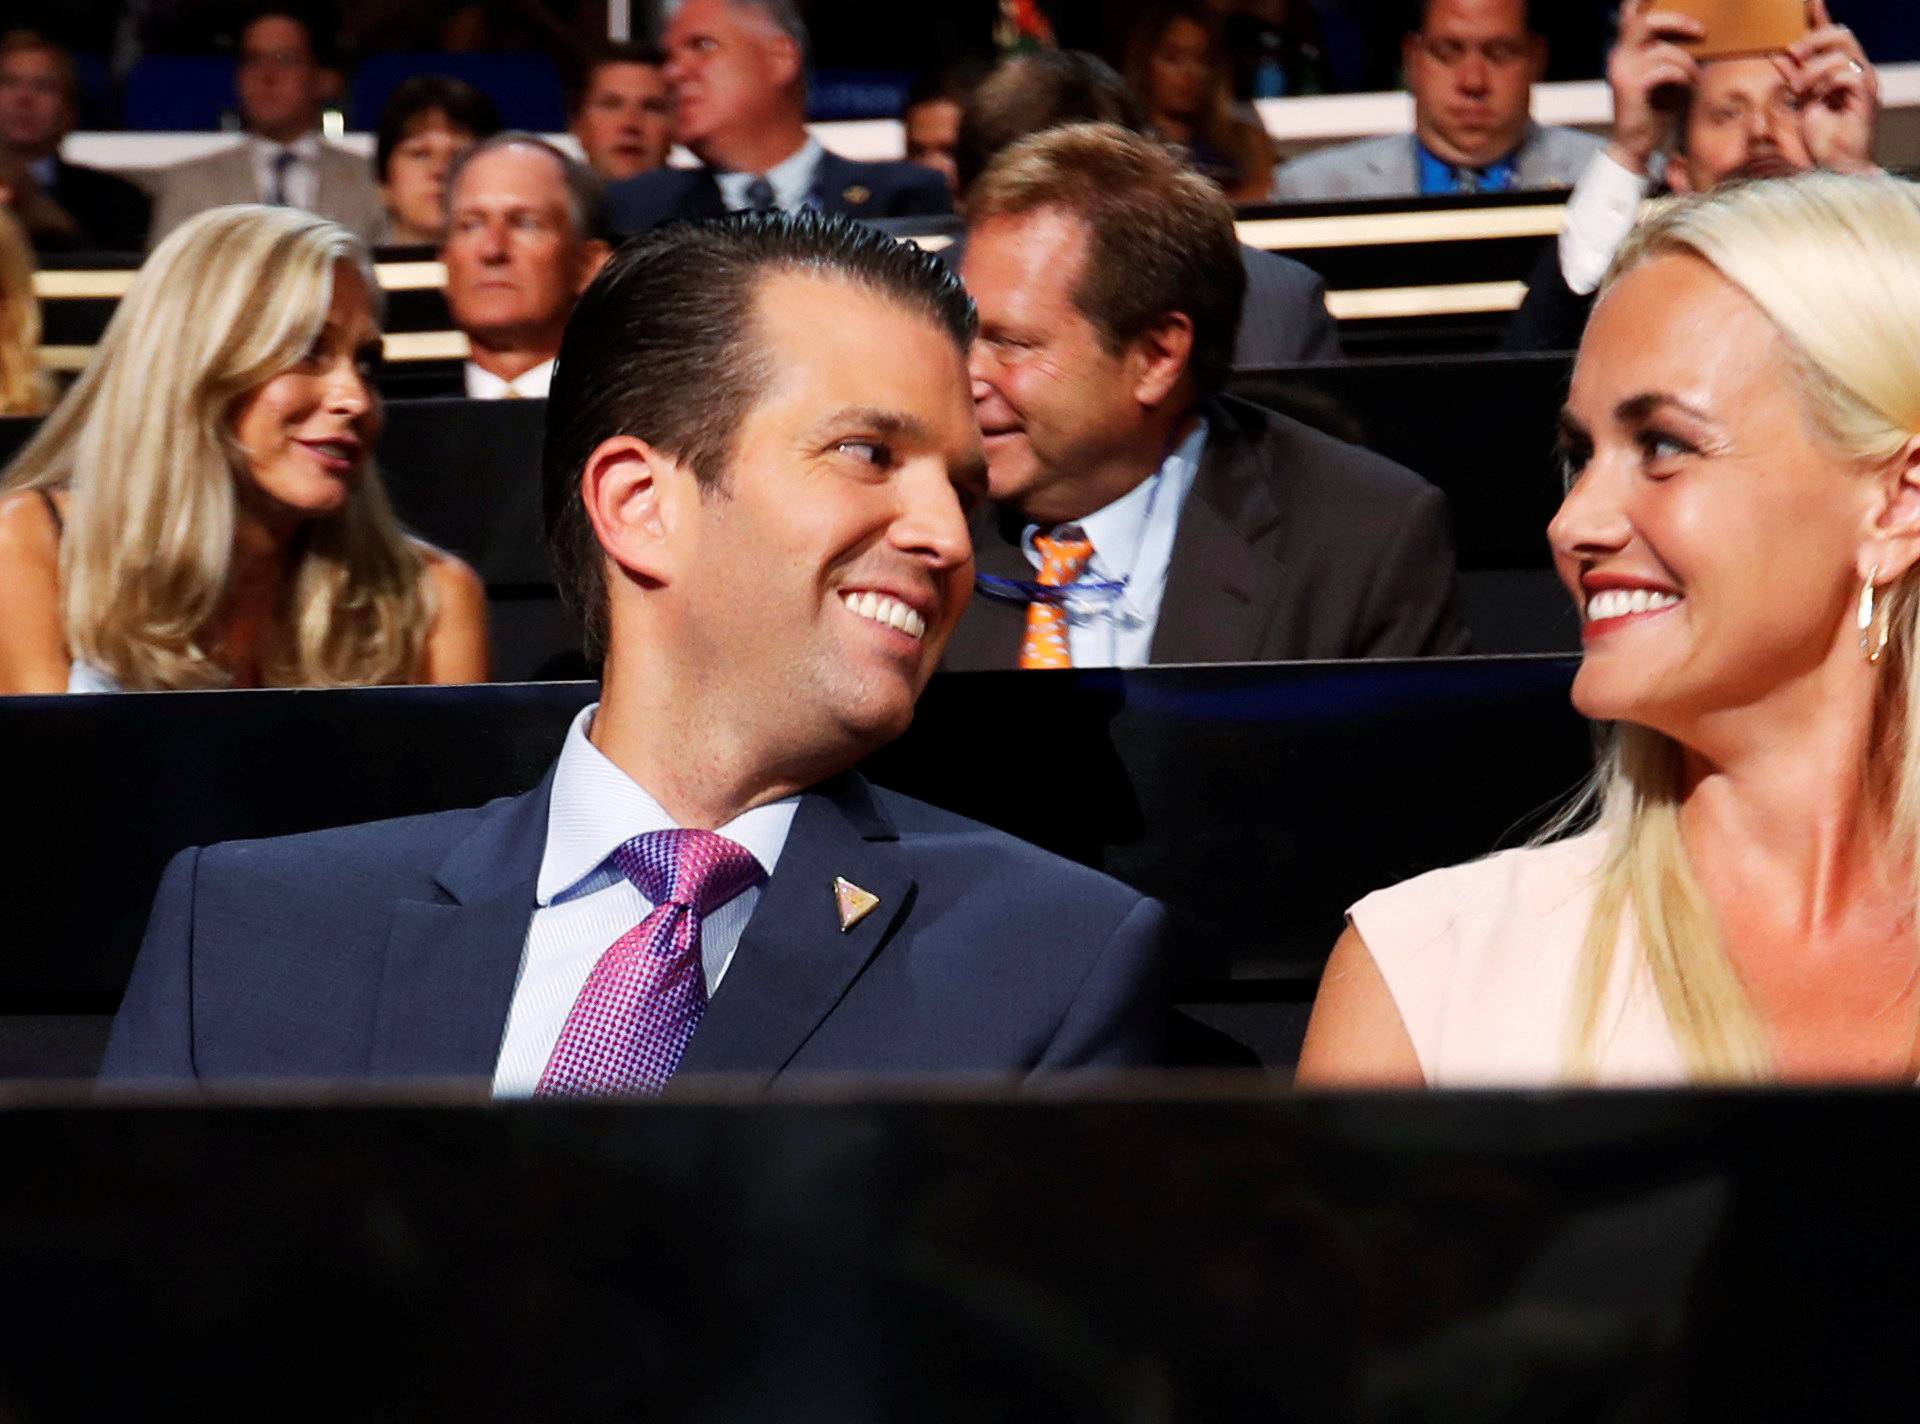 FILE PHOTO: Donald Trump Jr. and his wife Vanessa attend the second day session at the Republican National Convention in Cleveland